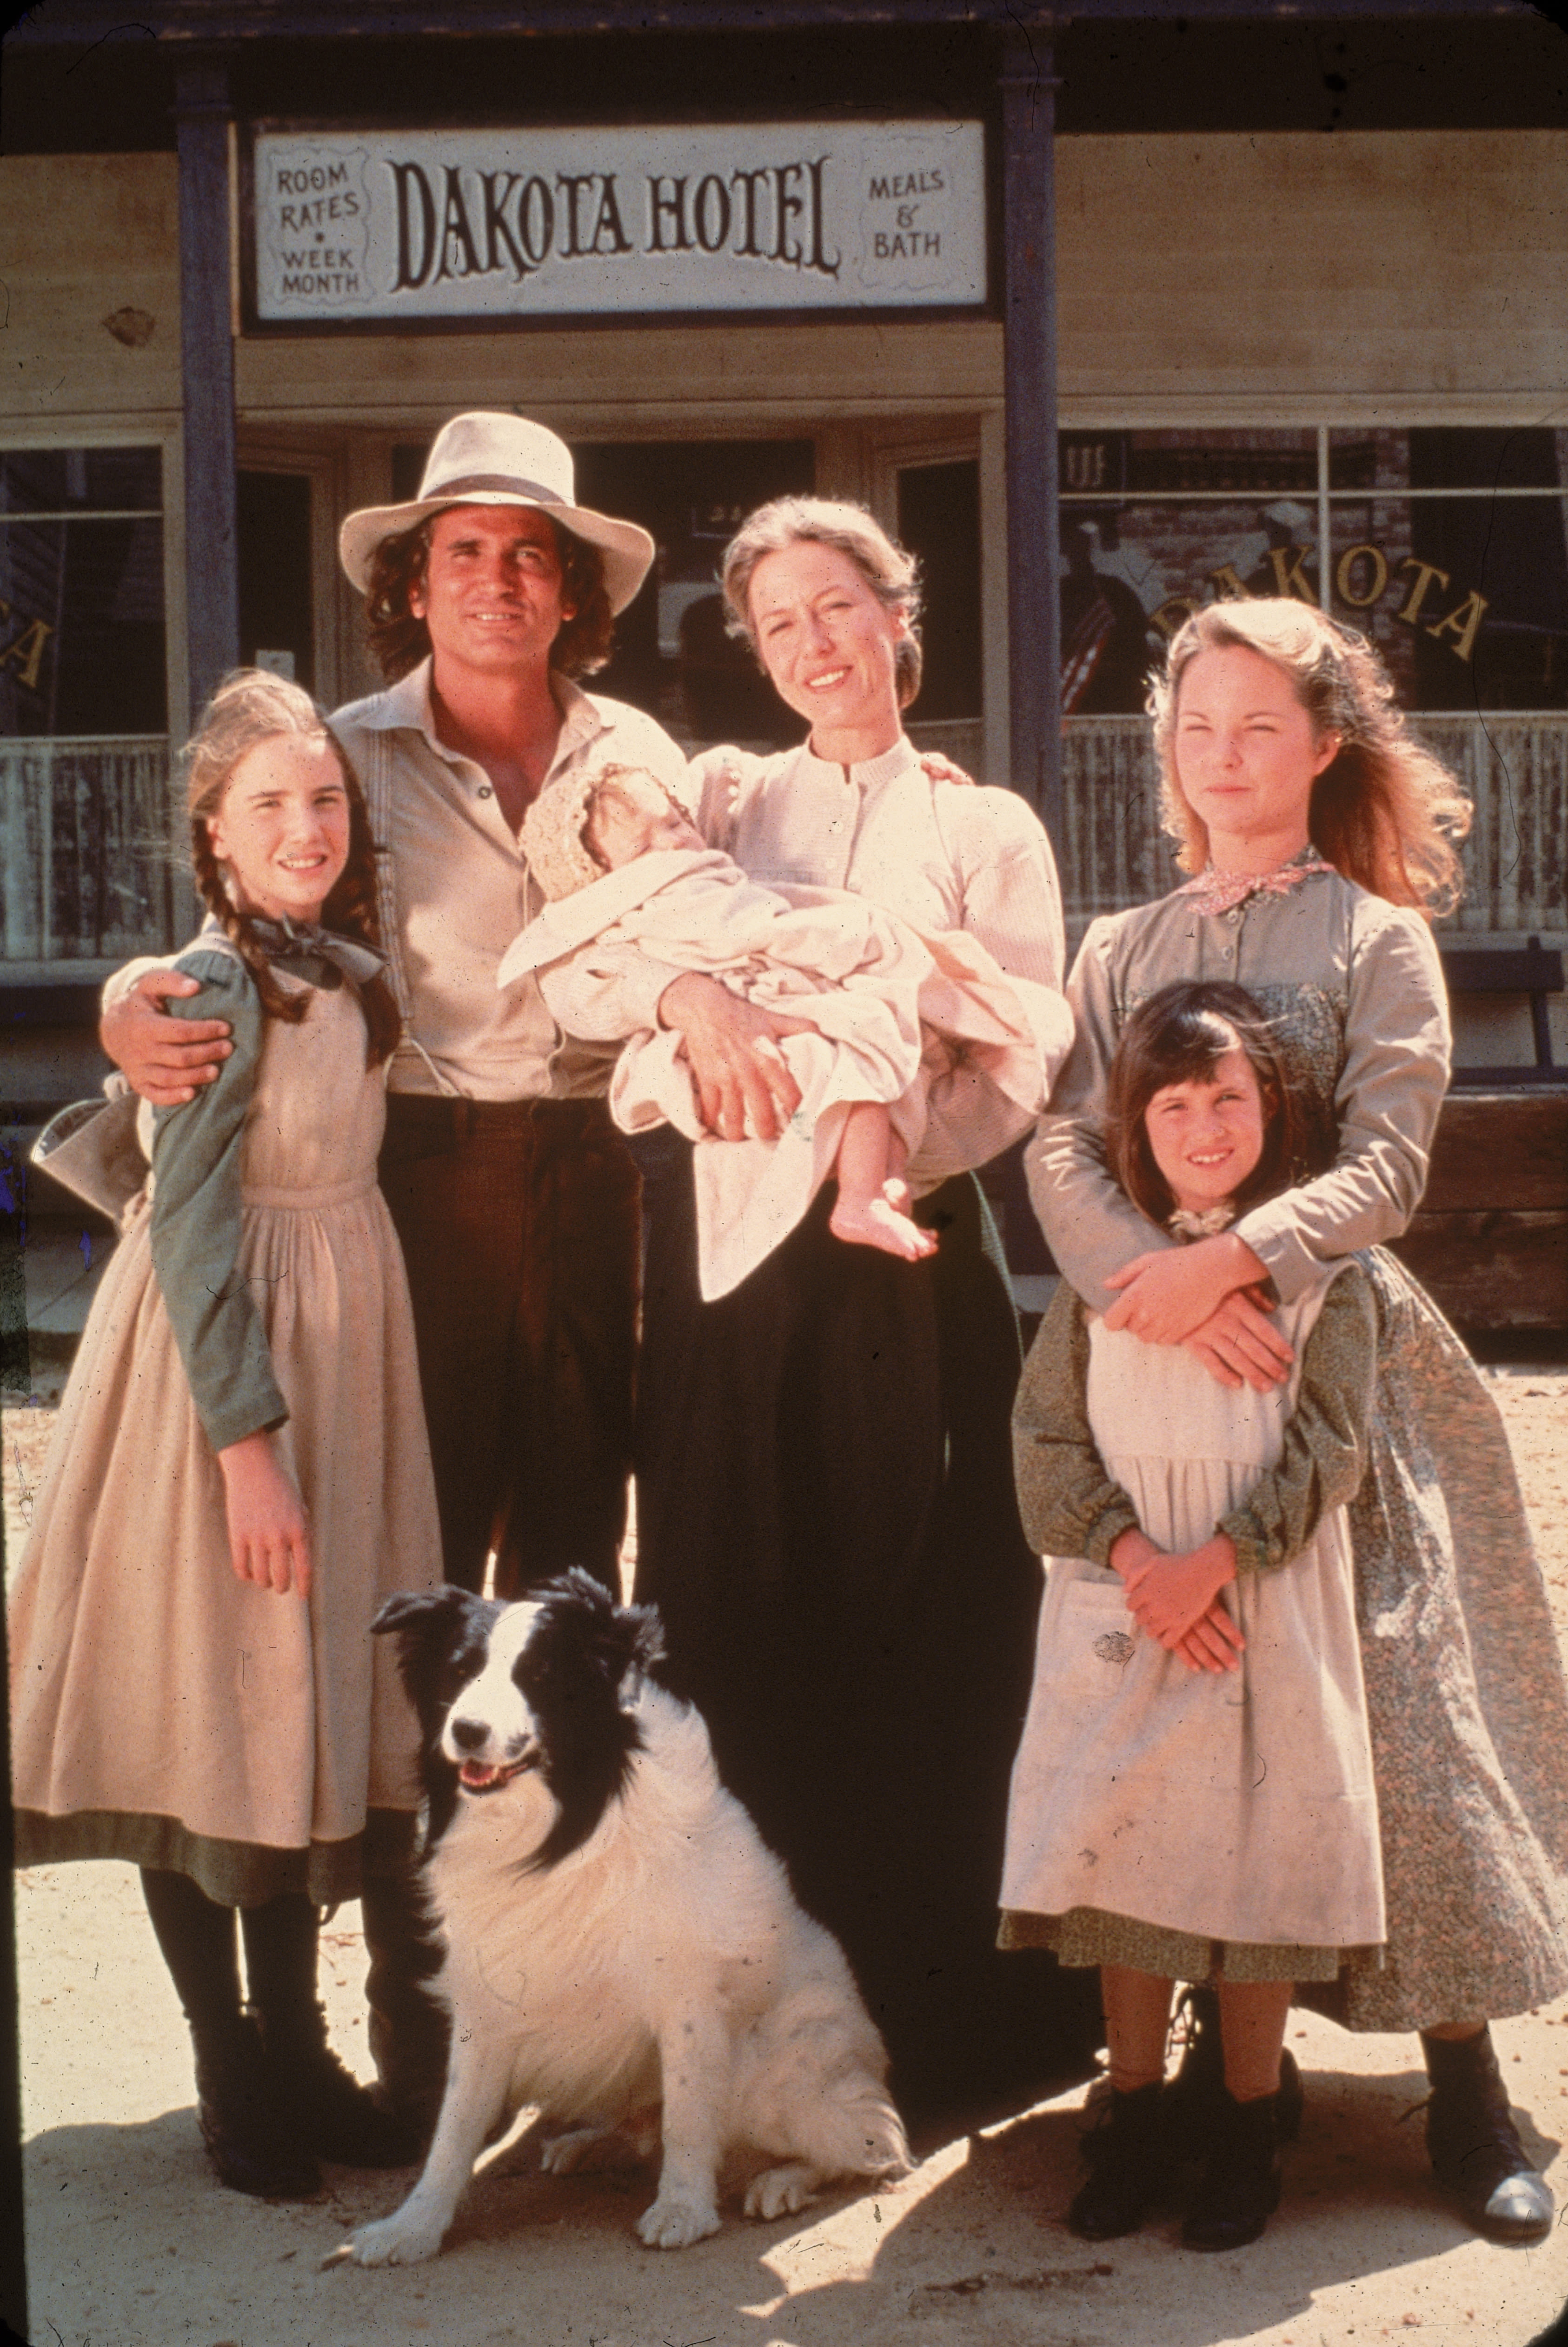 ‘Little House on the Prairie’ Turns 50! Look Back at the Show That Proves ‘We Can Make It Through’